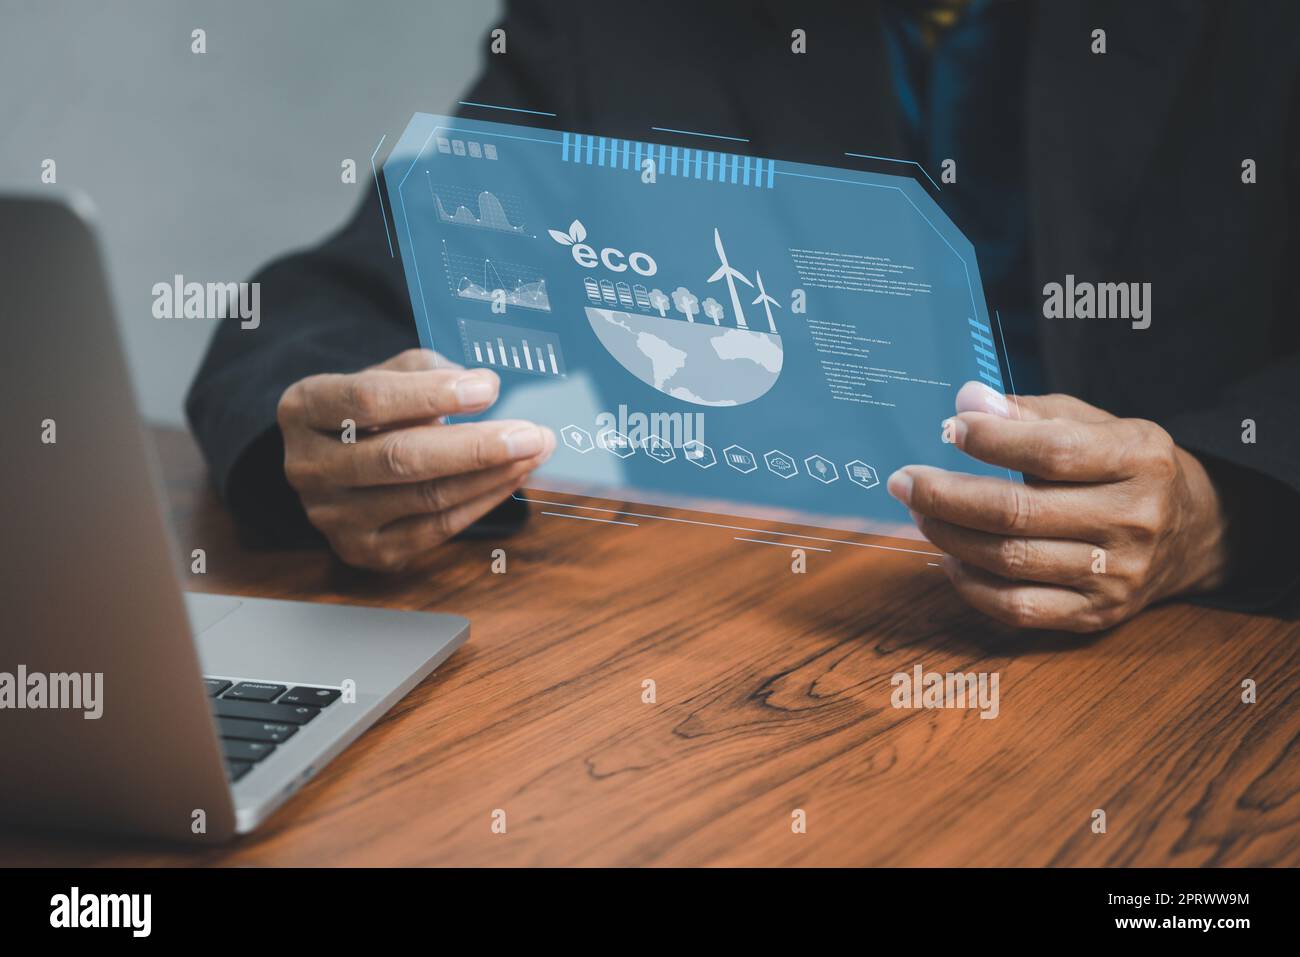 Businessman touching screen virtual icon eco energy sustainable environment digital technology concept. Stock Photo